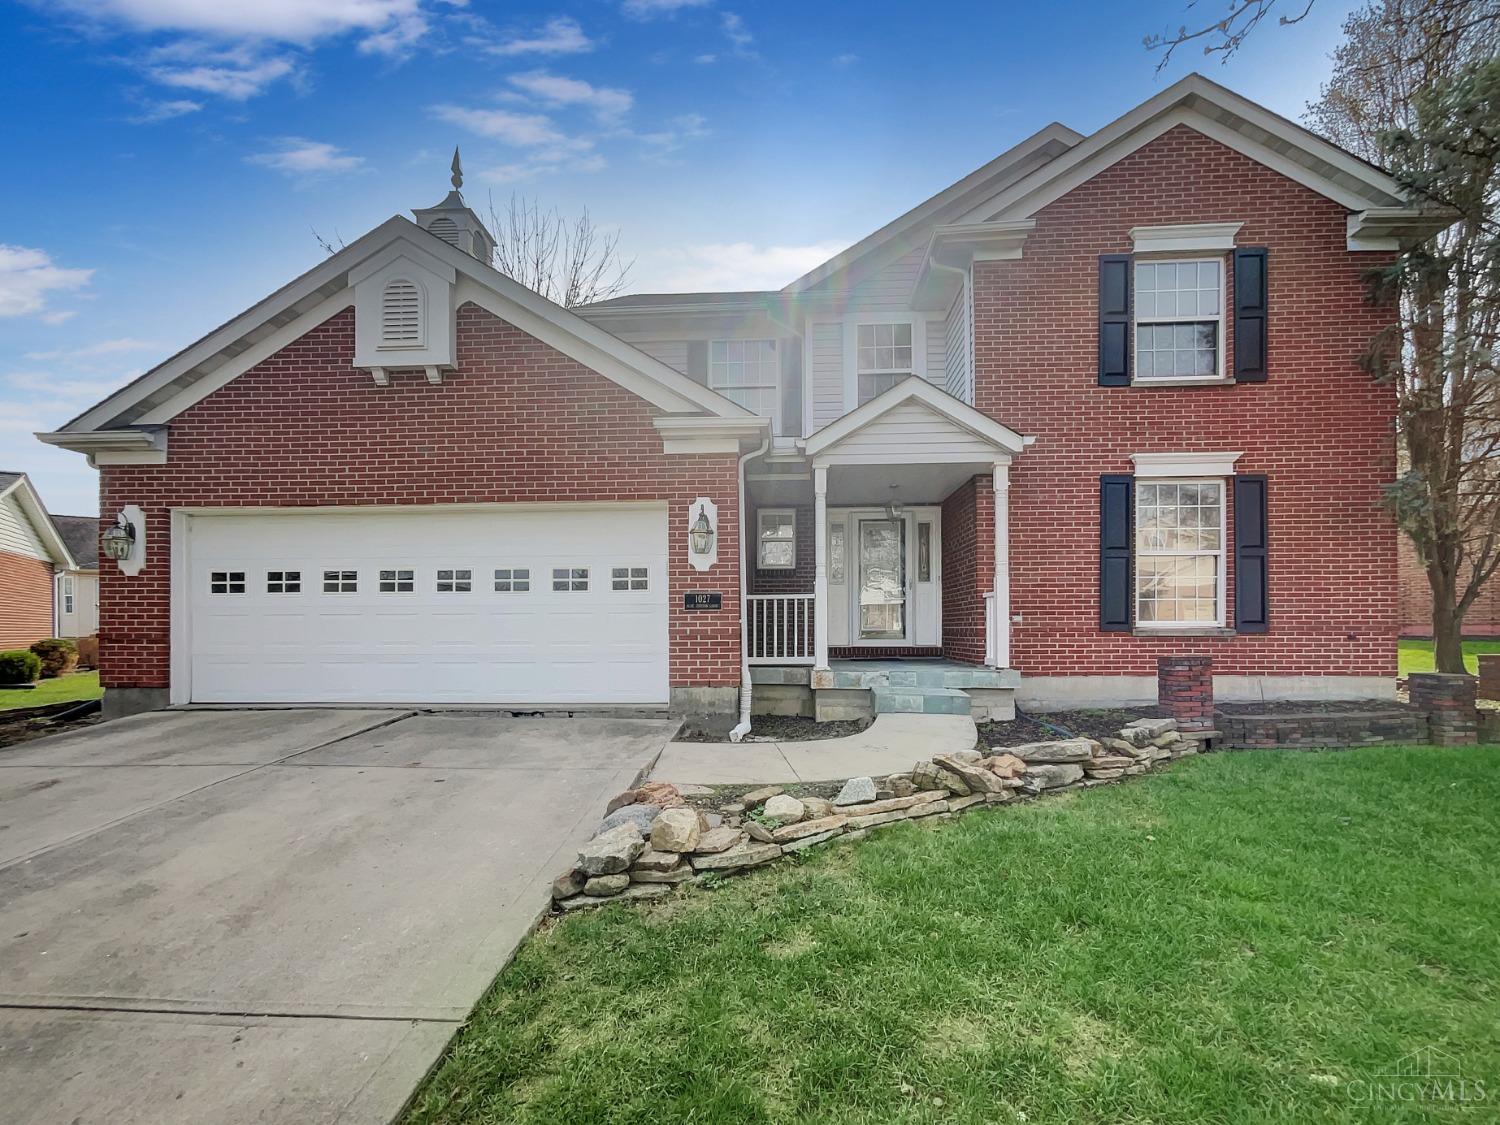 1027 Olde Station Ct, Fairfield, OH 